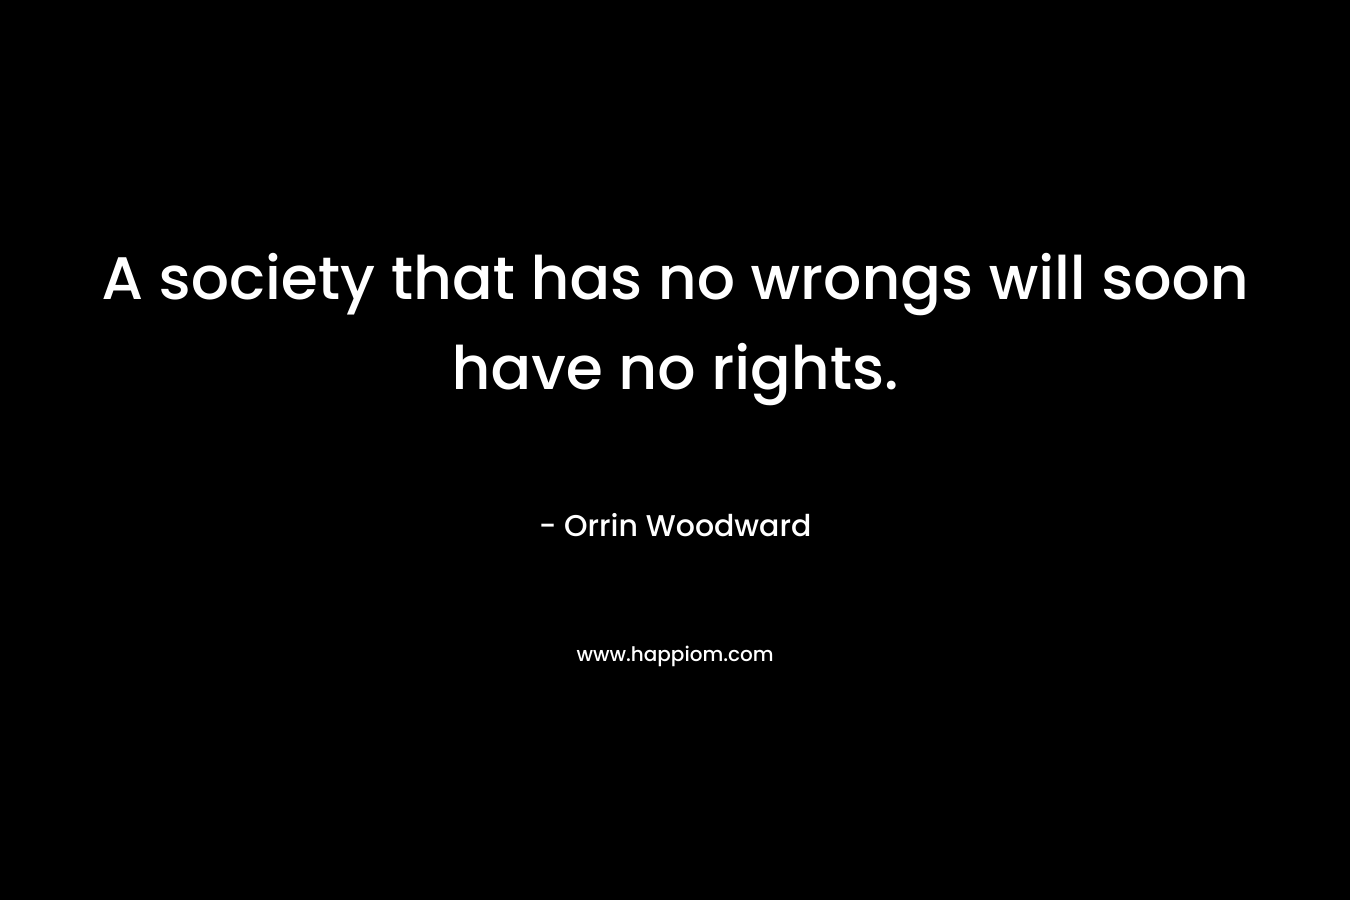 A society that has no wrongs will soon have no rights.